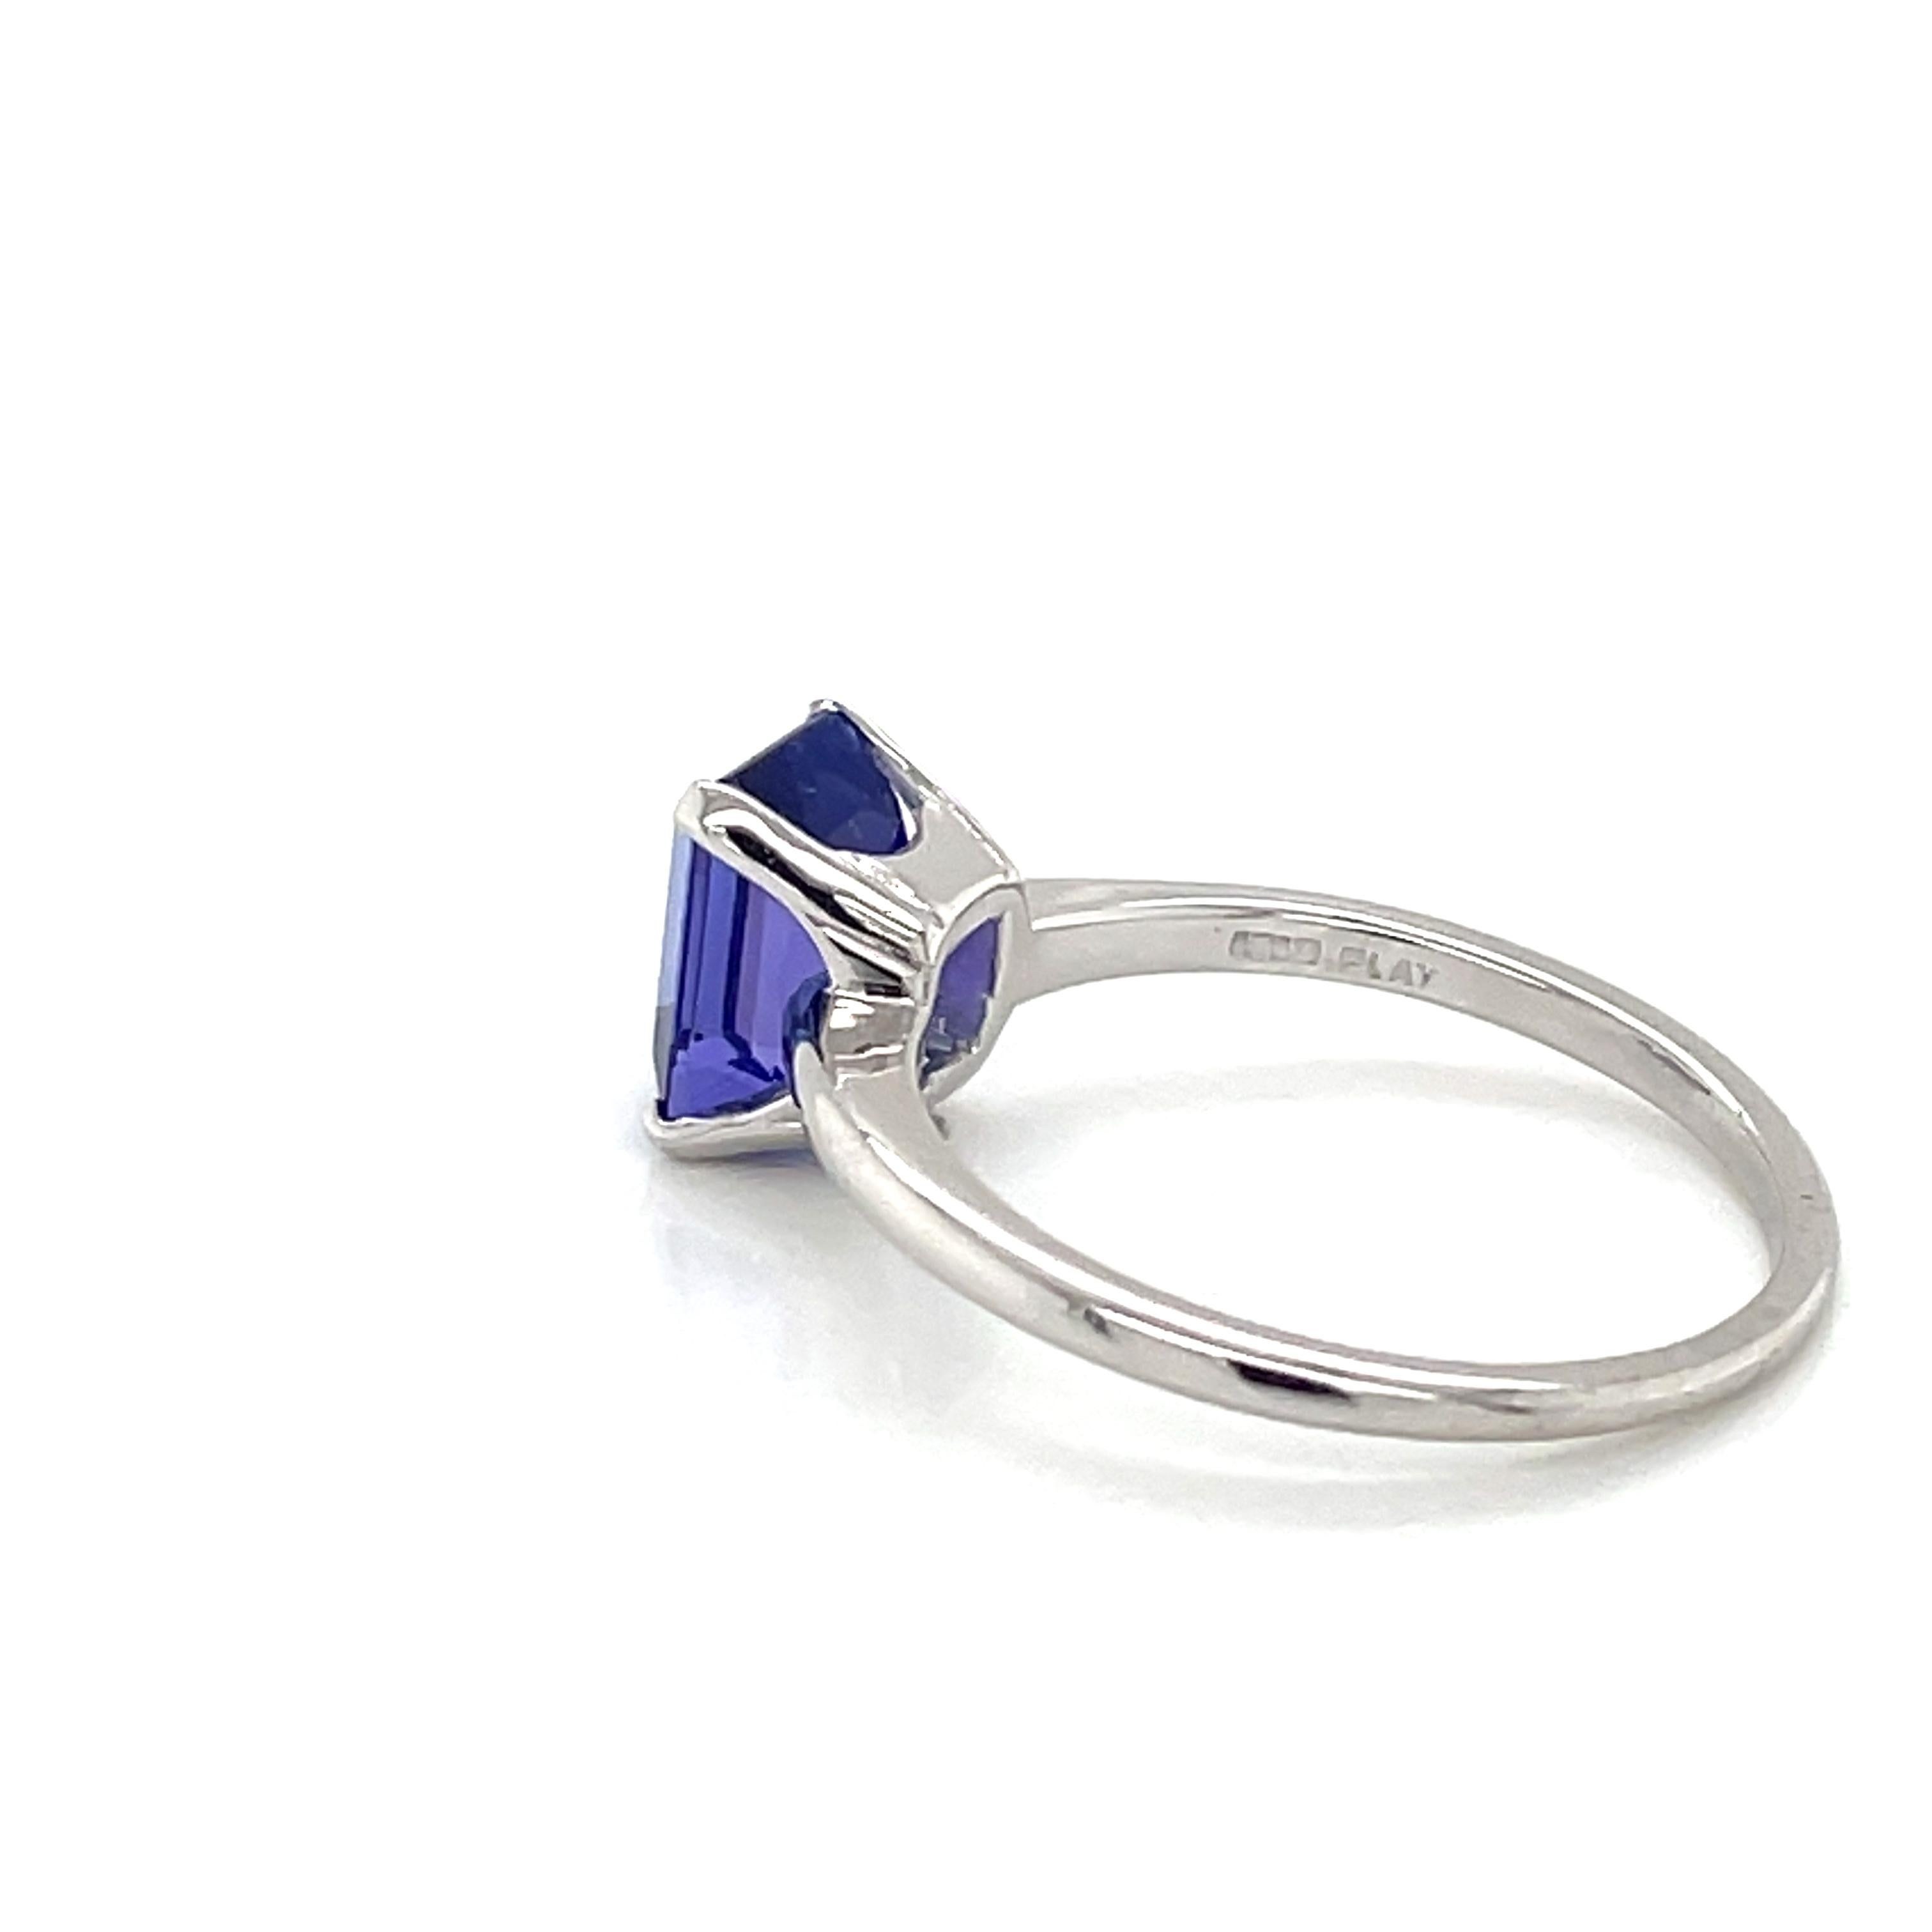 Tiffany & Company Vintage 2.08 Carat Tanzanite Platinum Ring AGL Certified In Excellent Condition For Sale In Mount Kisco, NY